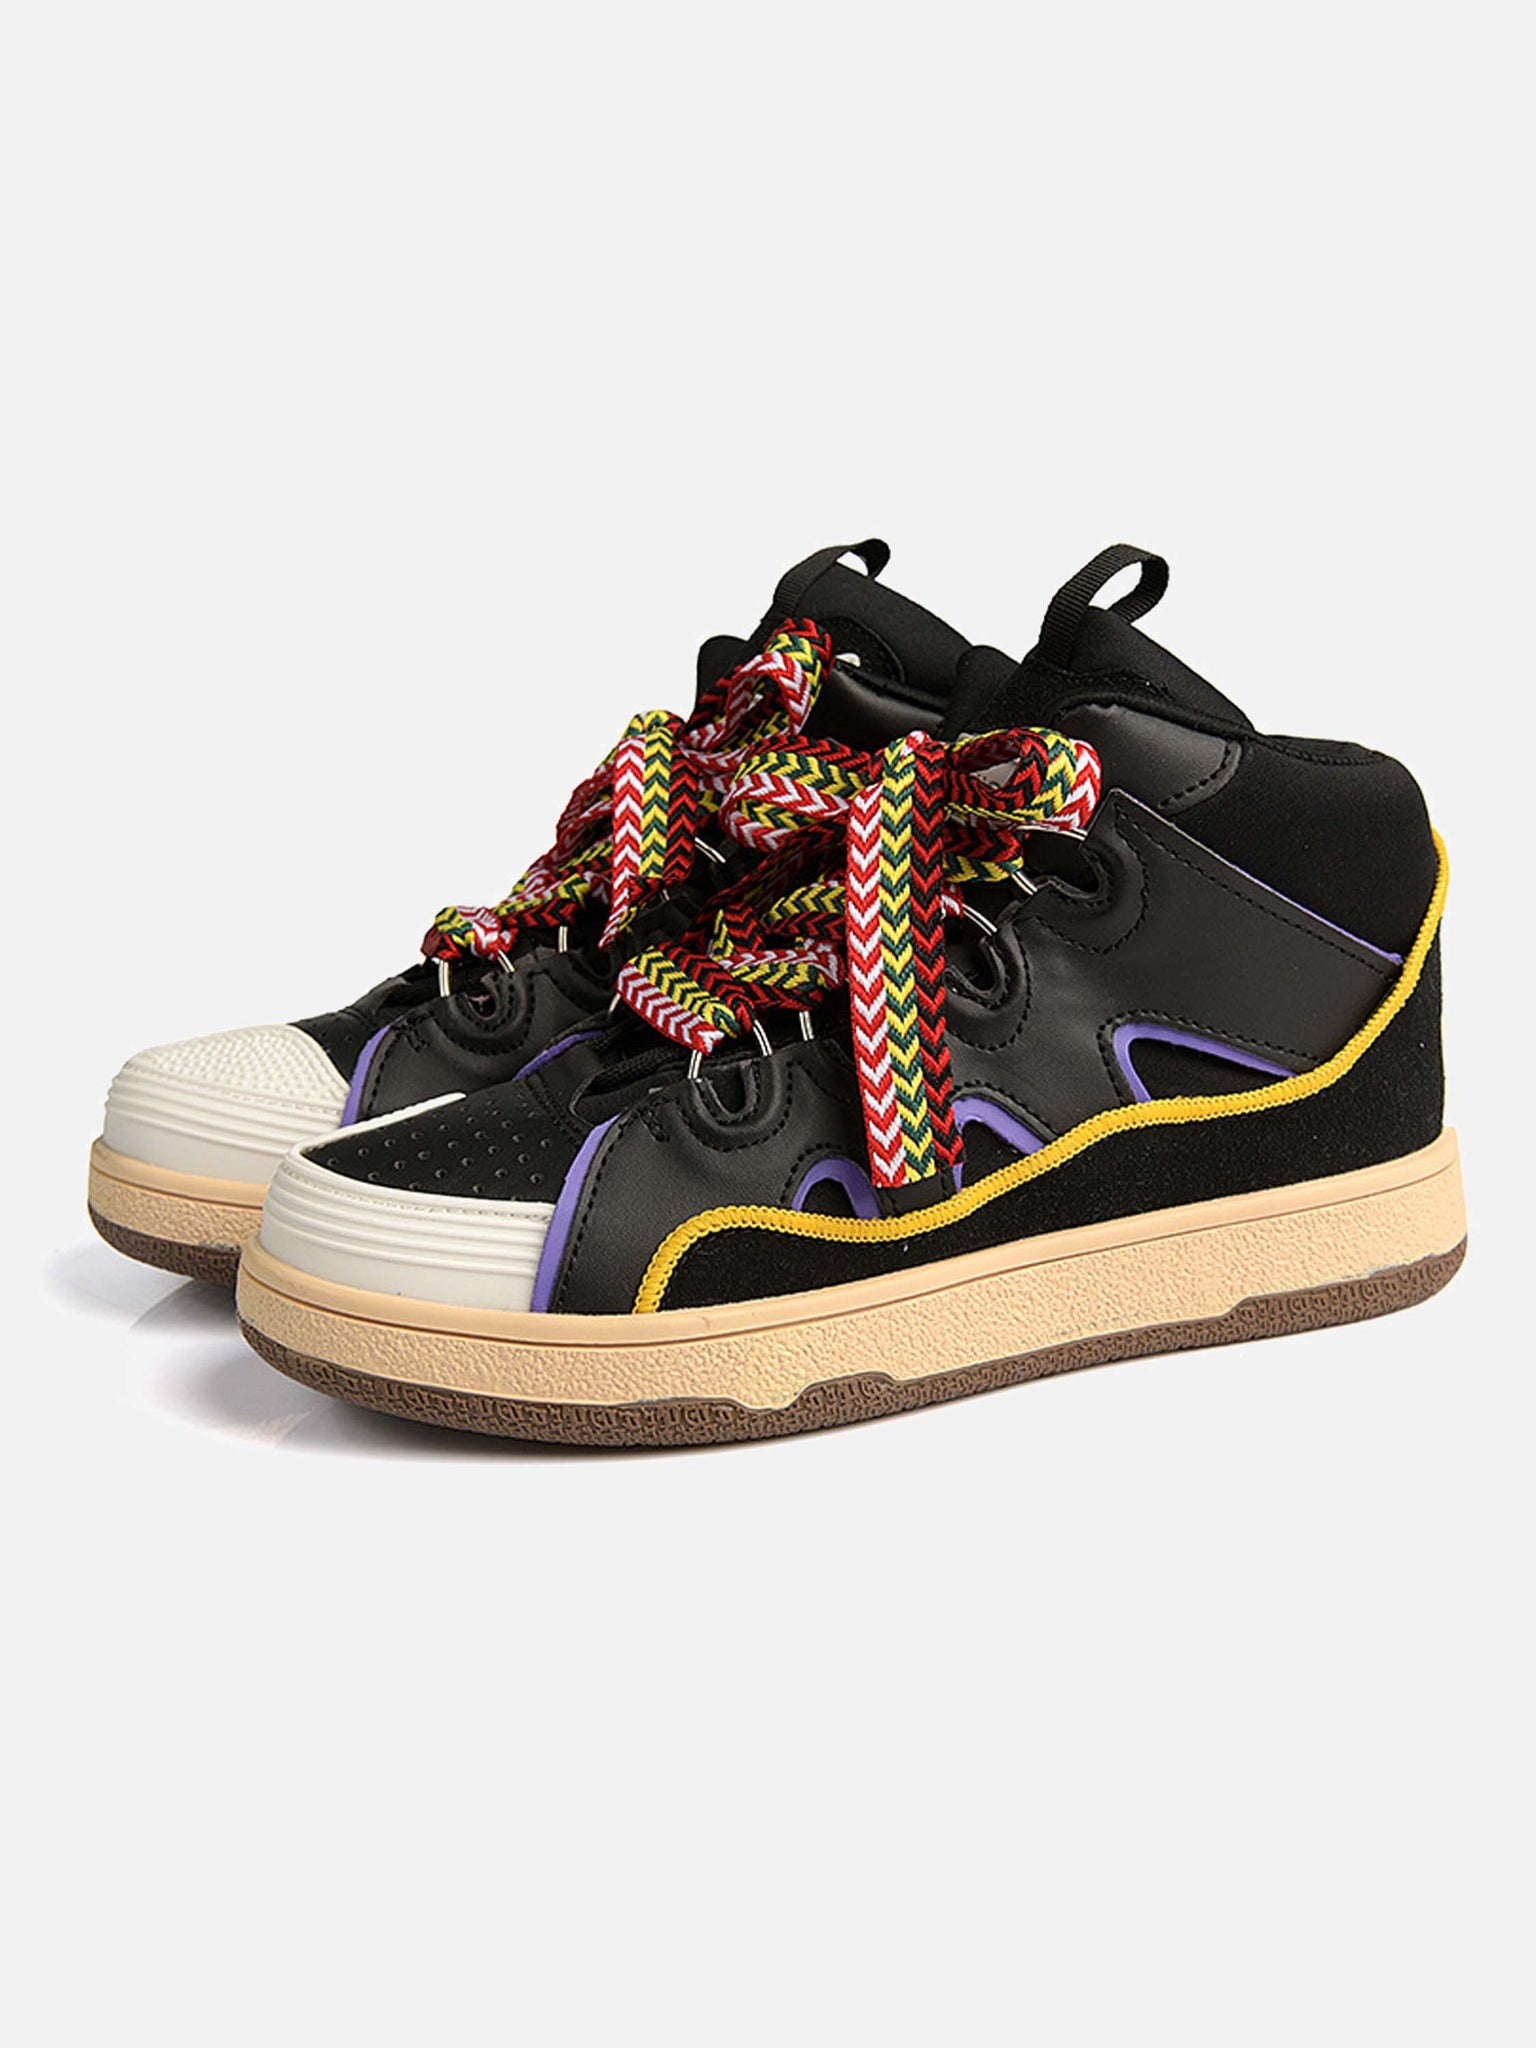 The Supermade American Hip Hop High Top Casual Sneakers